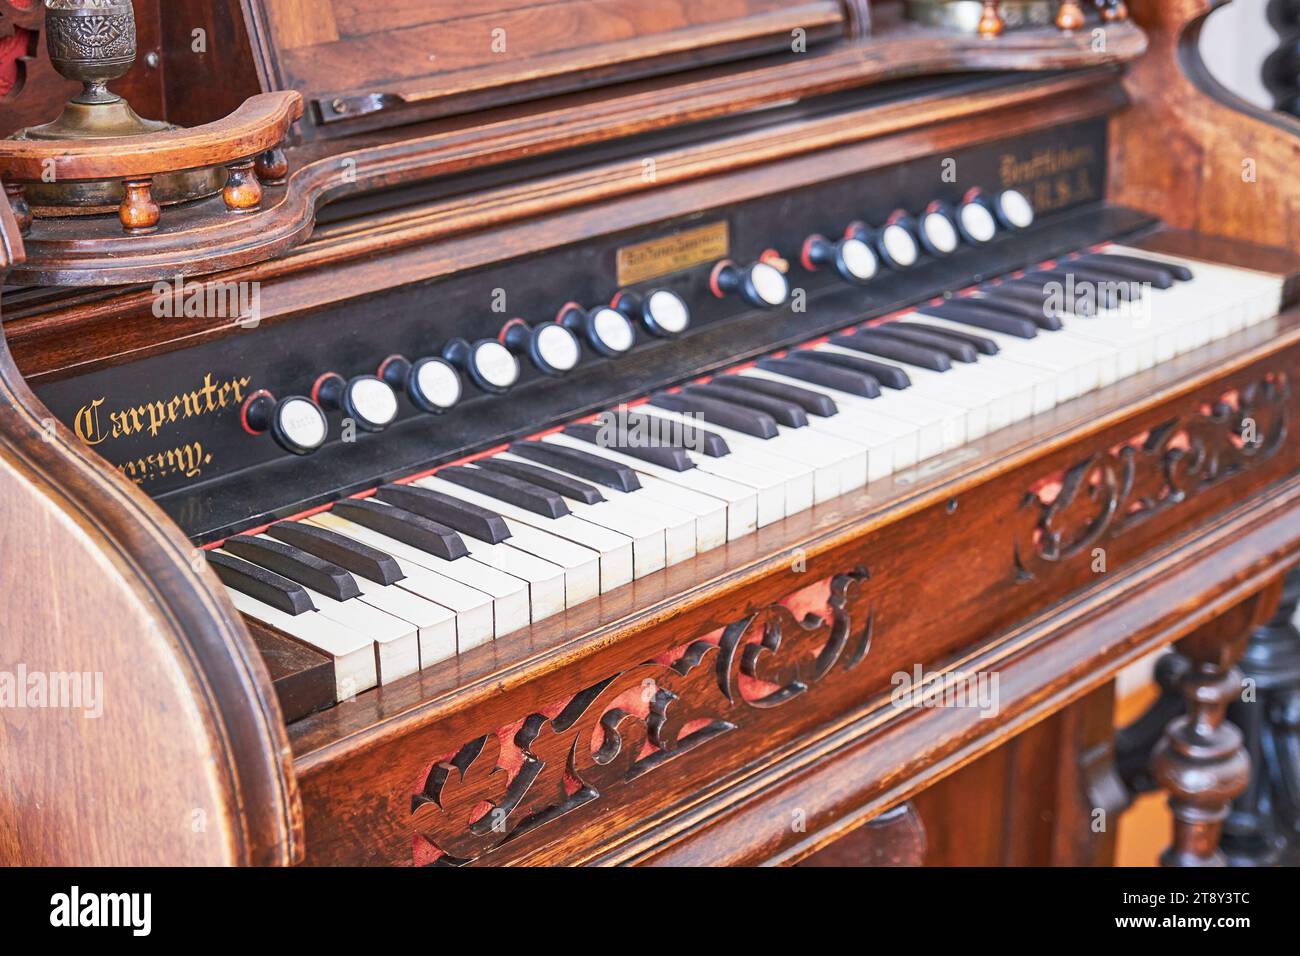 Yelabuga, Russia - June 18, 2023: Close-up of vintage musical keyboard instrument - harmonium, 19th century. Upper manual keyboard and pitch registers Stock Photo